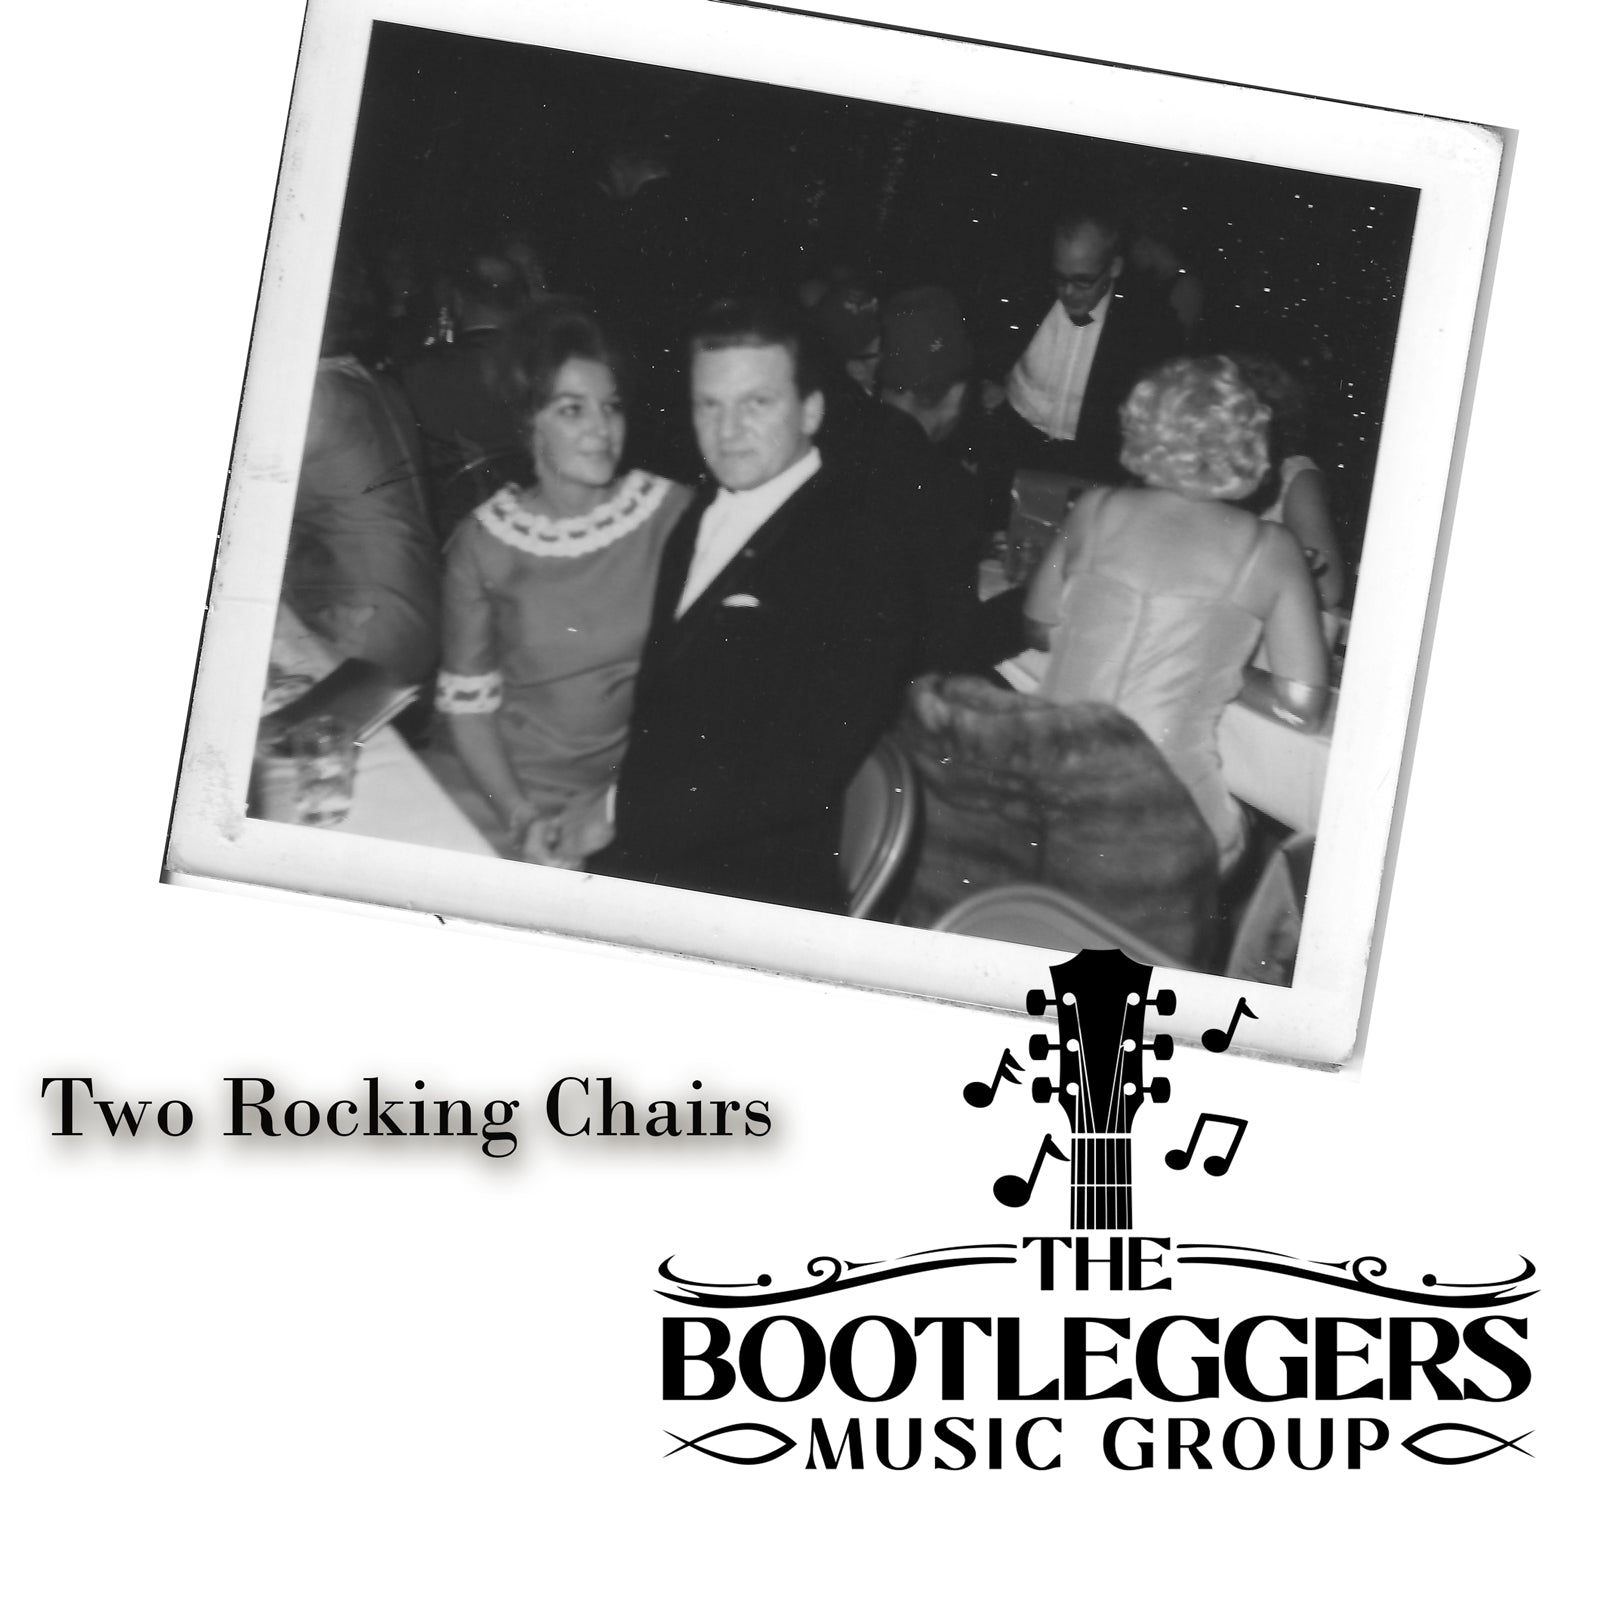 The Bootleggers Music Group - 'Two Rocking Chairs'